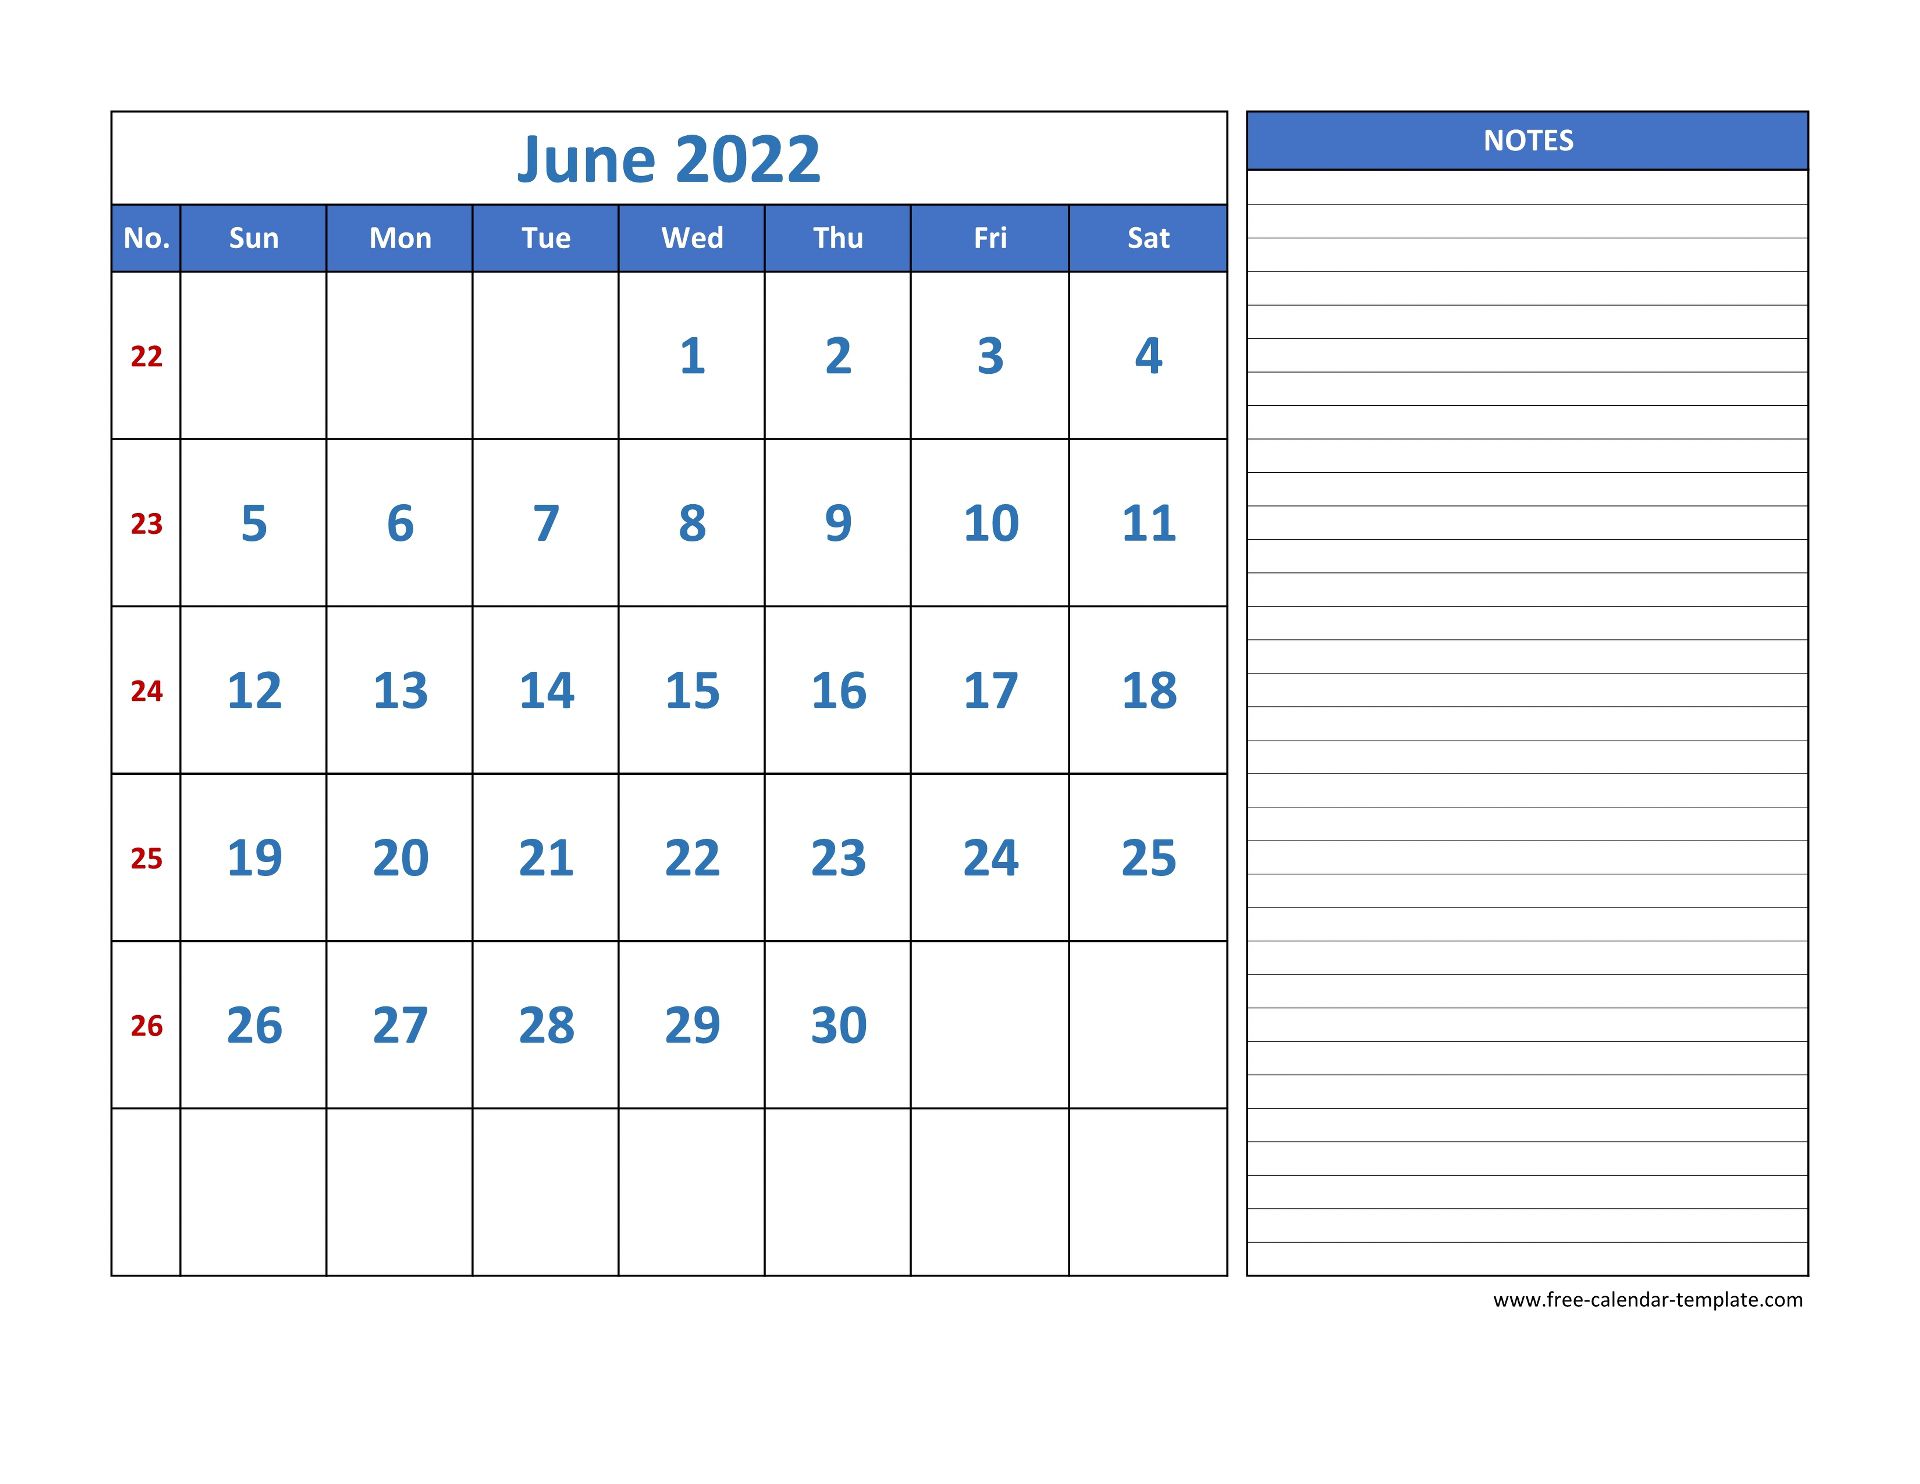 June Calendar 2022 grid lines for holidays and notes (horizontal